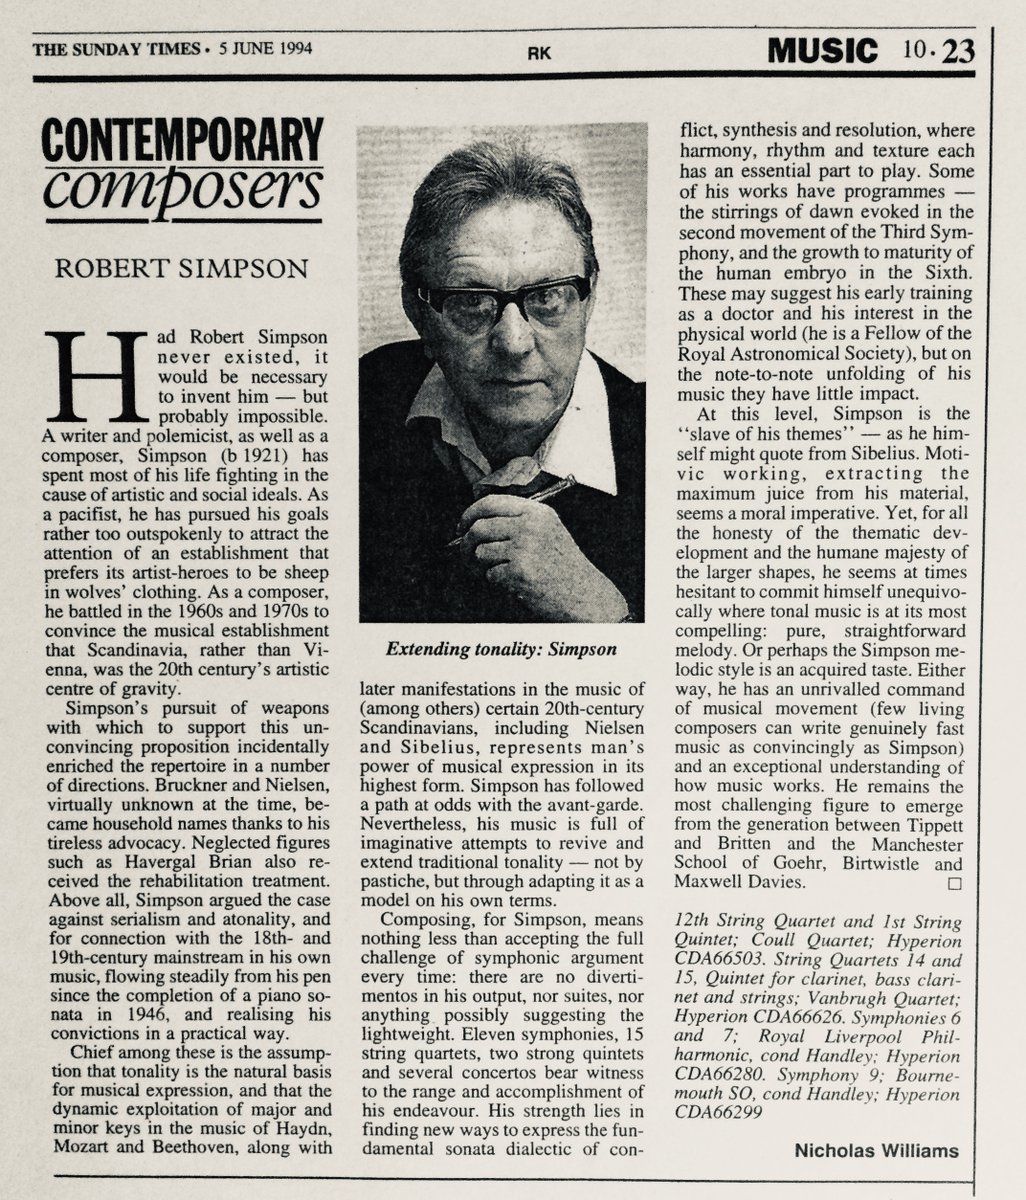 Next: 'Had Robert Simpson never existed, it would be necessary to invent him - but probably impossible.' More of the Sunday Times 'Contemporary Composer' series. 5 June 1994.